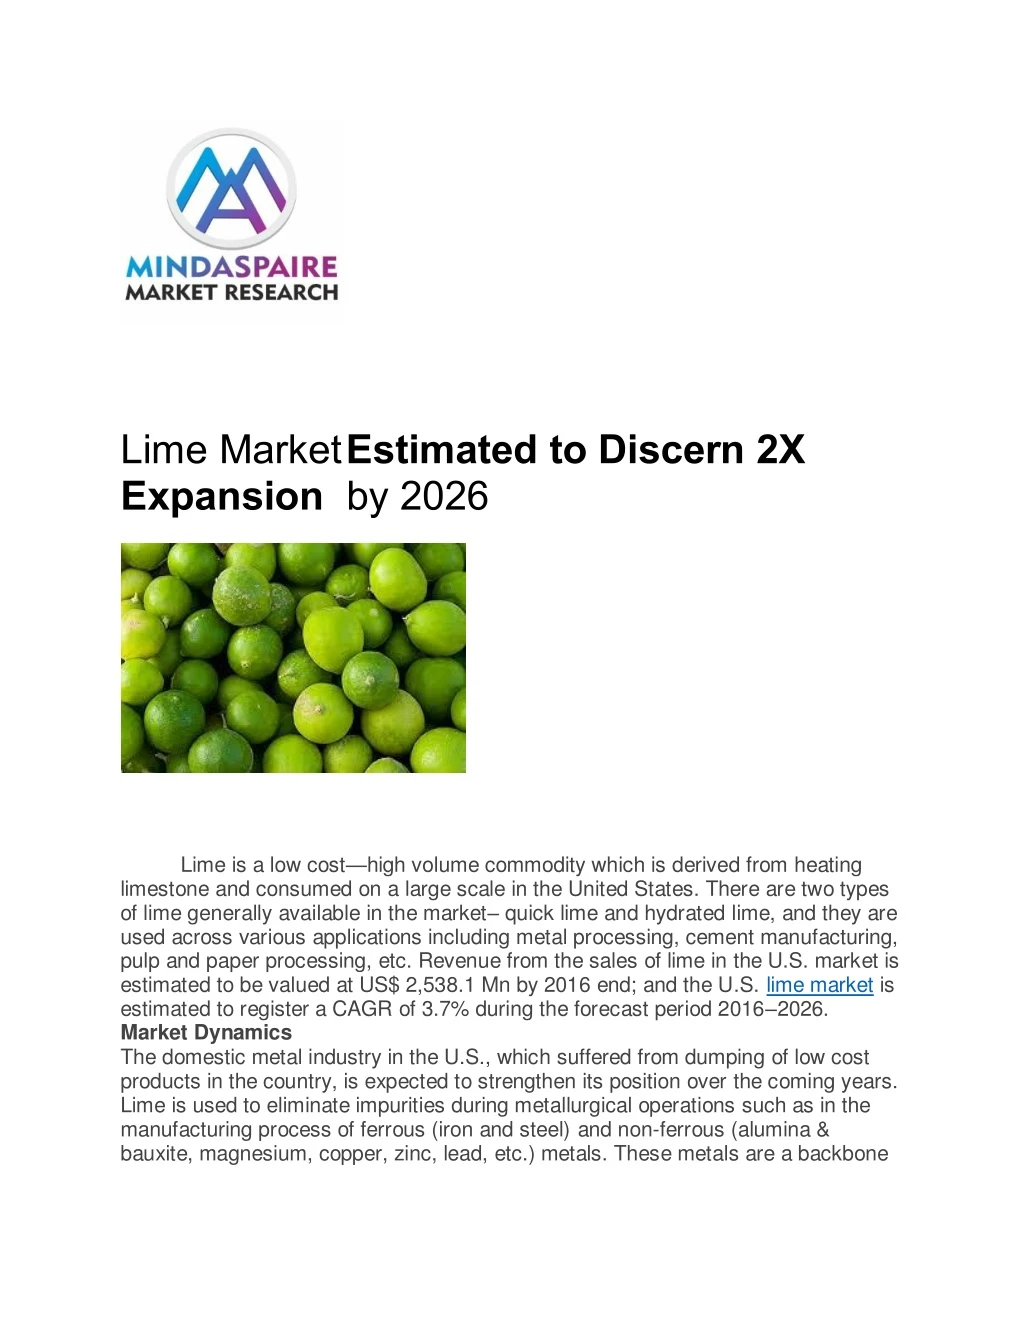 lime market estimated to discern 2x expansion